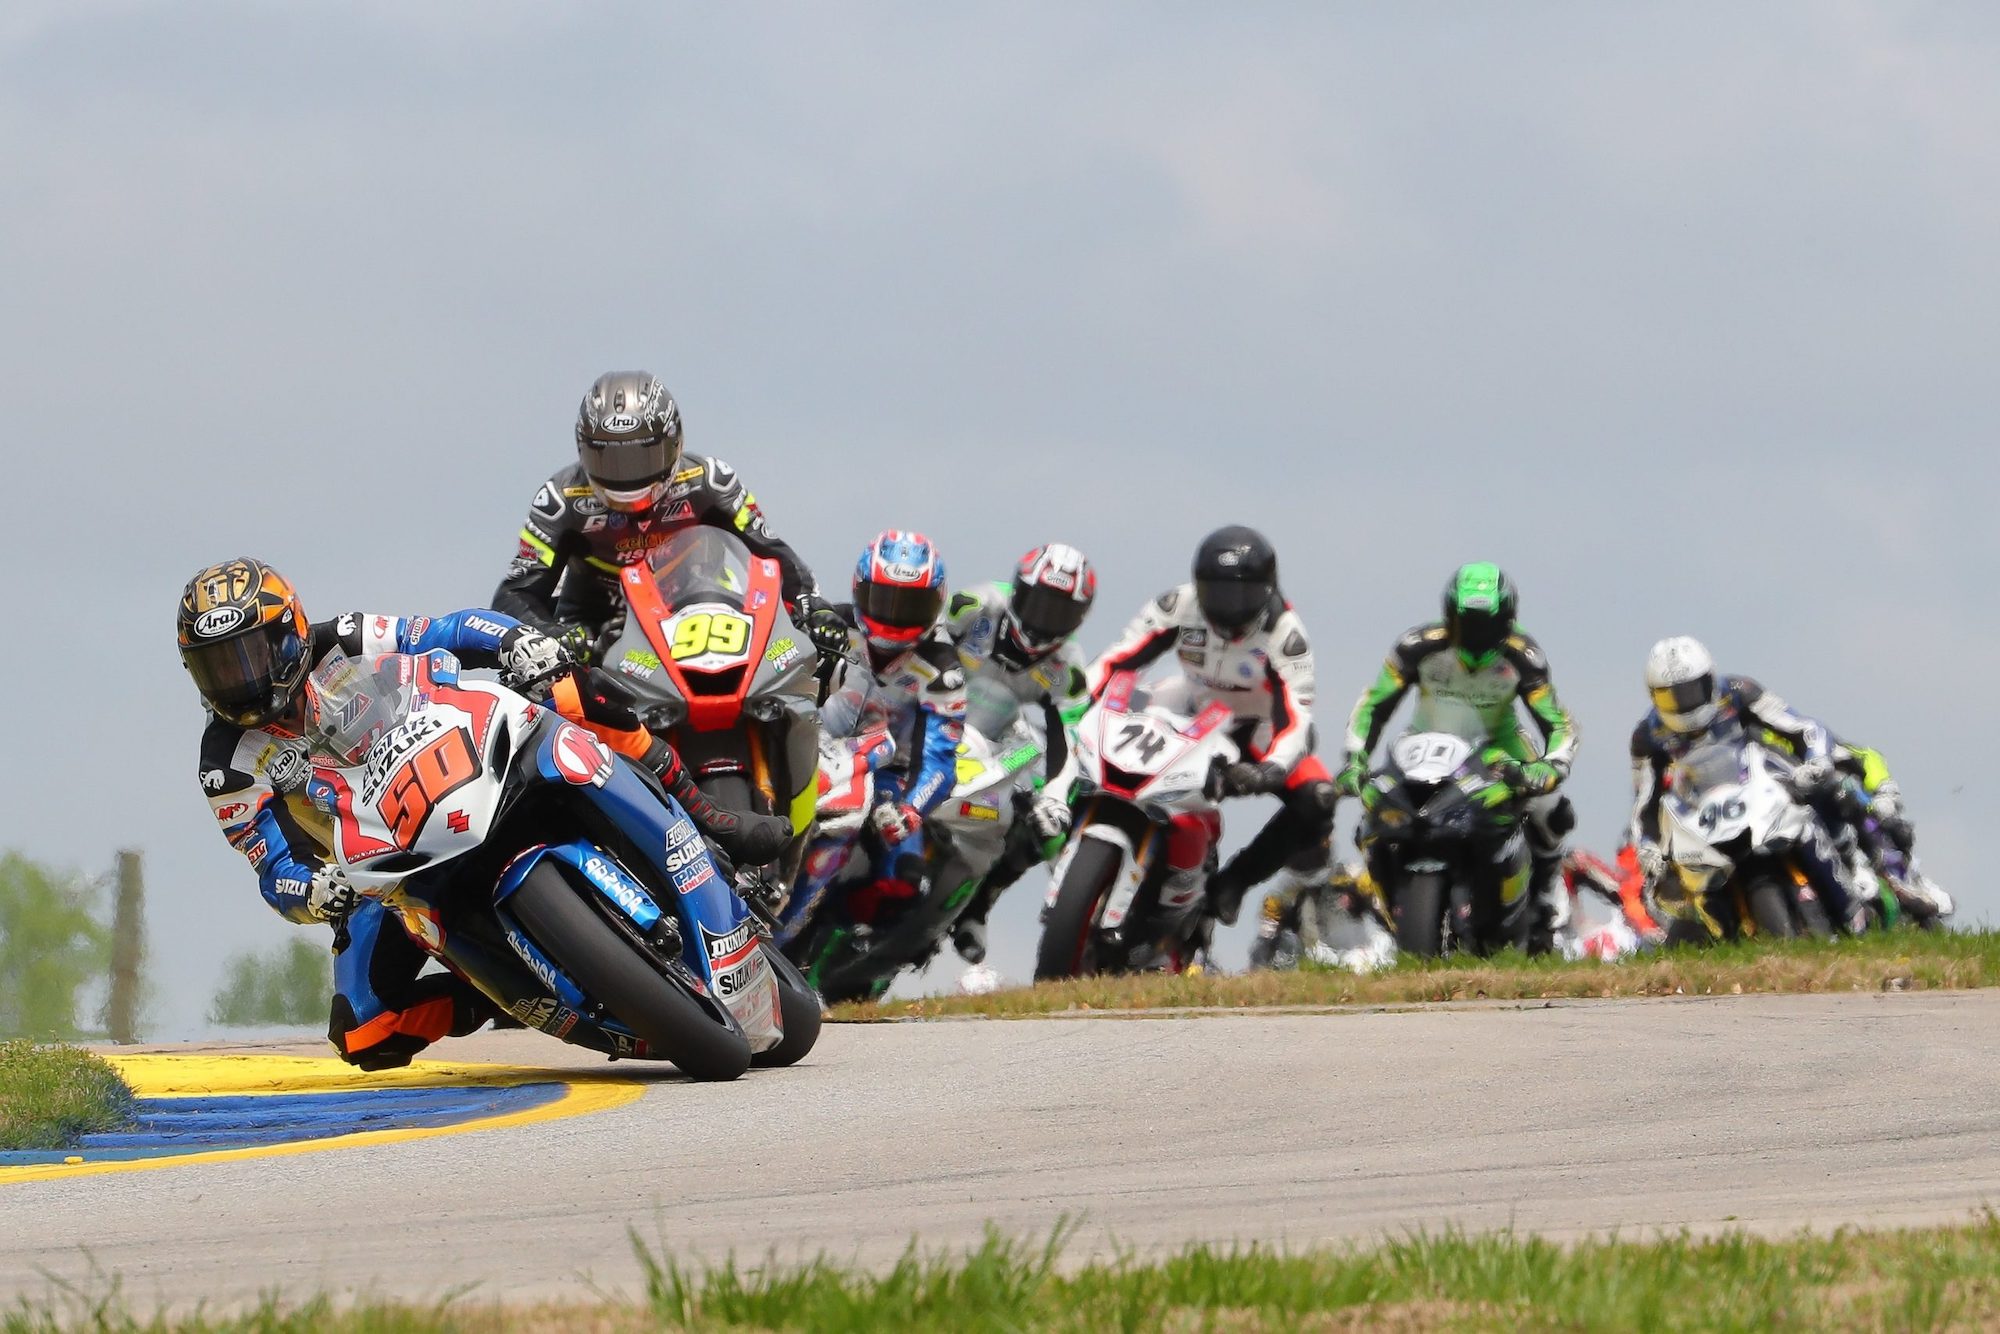 A view of MotoAmerica Superbikes class racing at Road America 2021